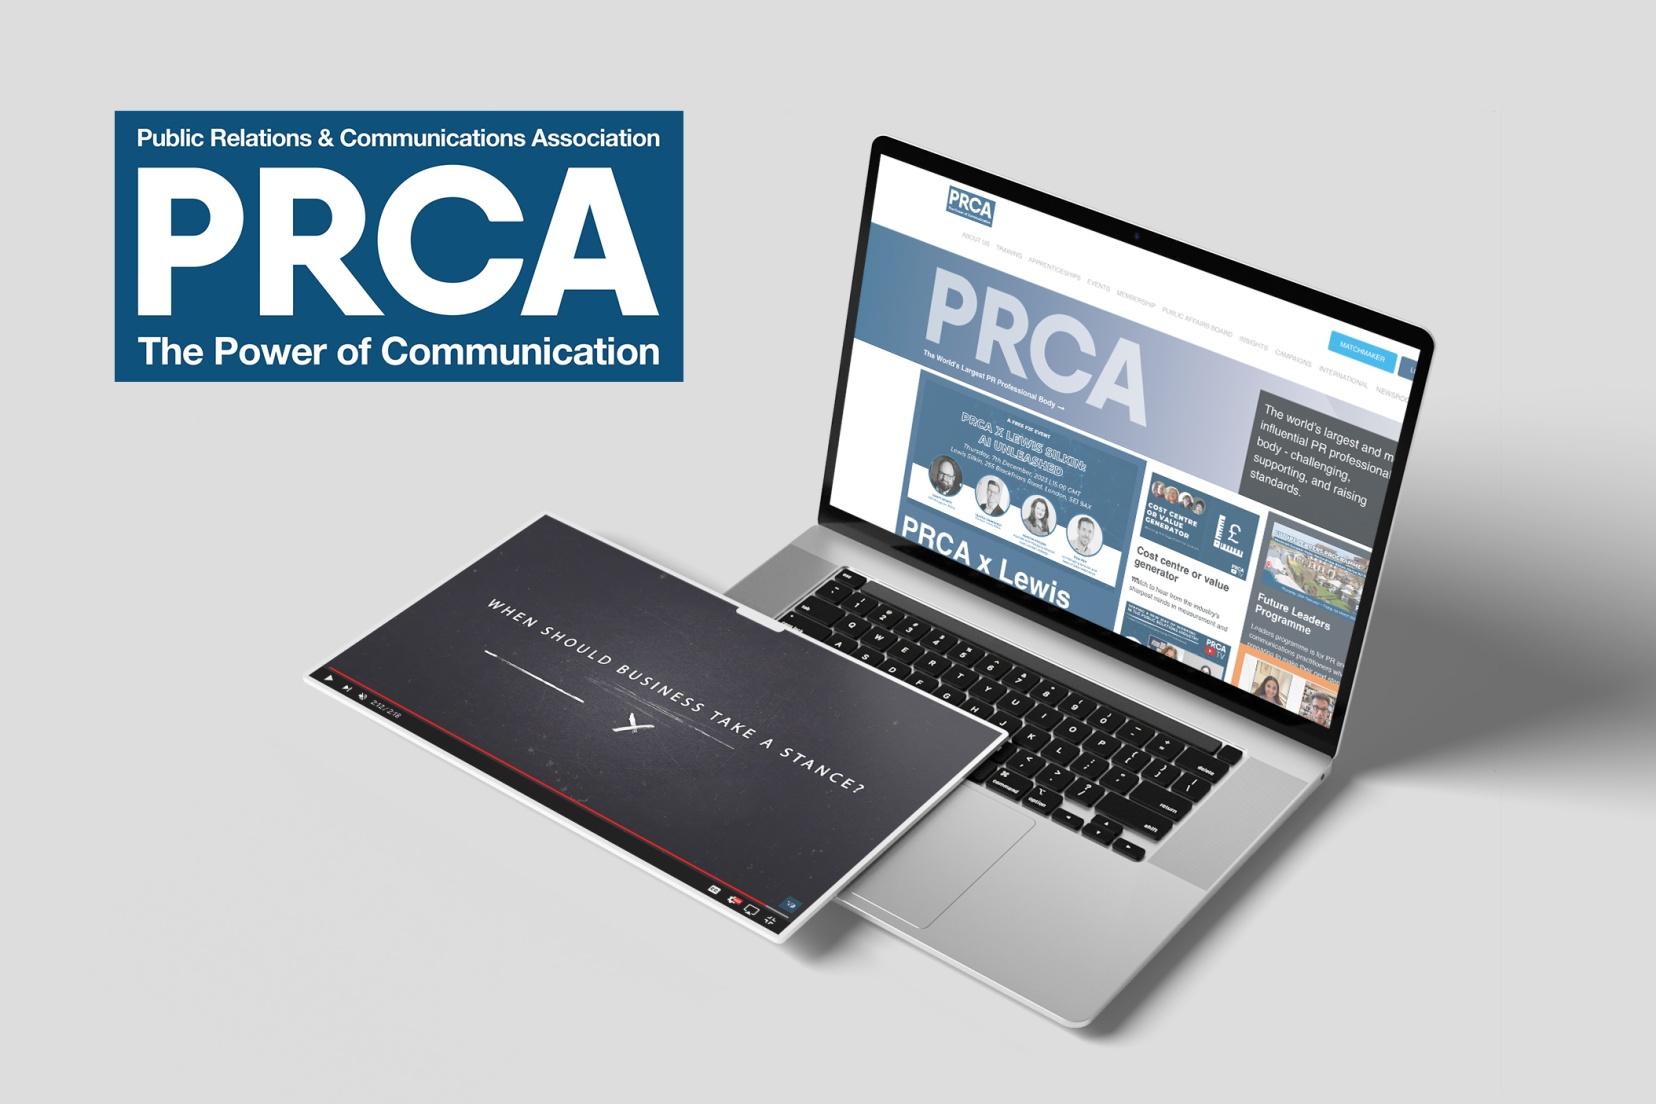 Public Relations and Communications Association (PRCA)